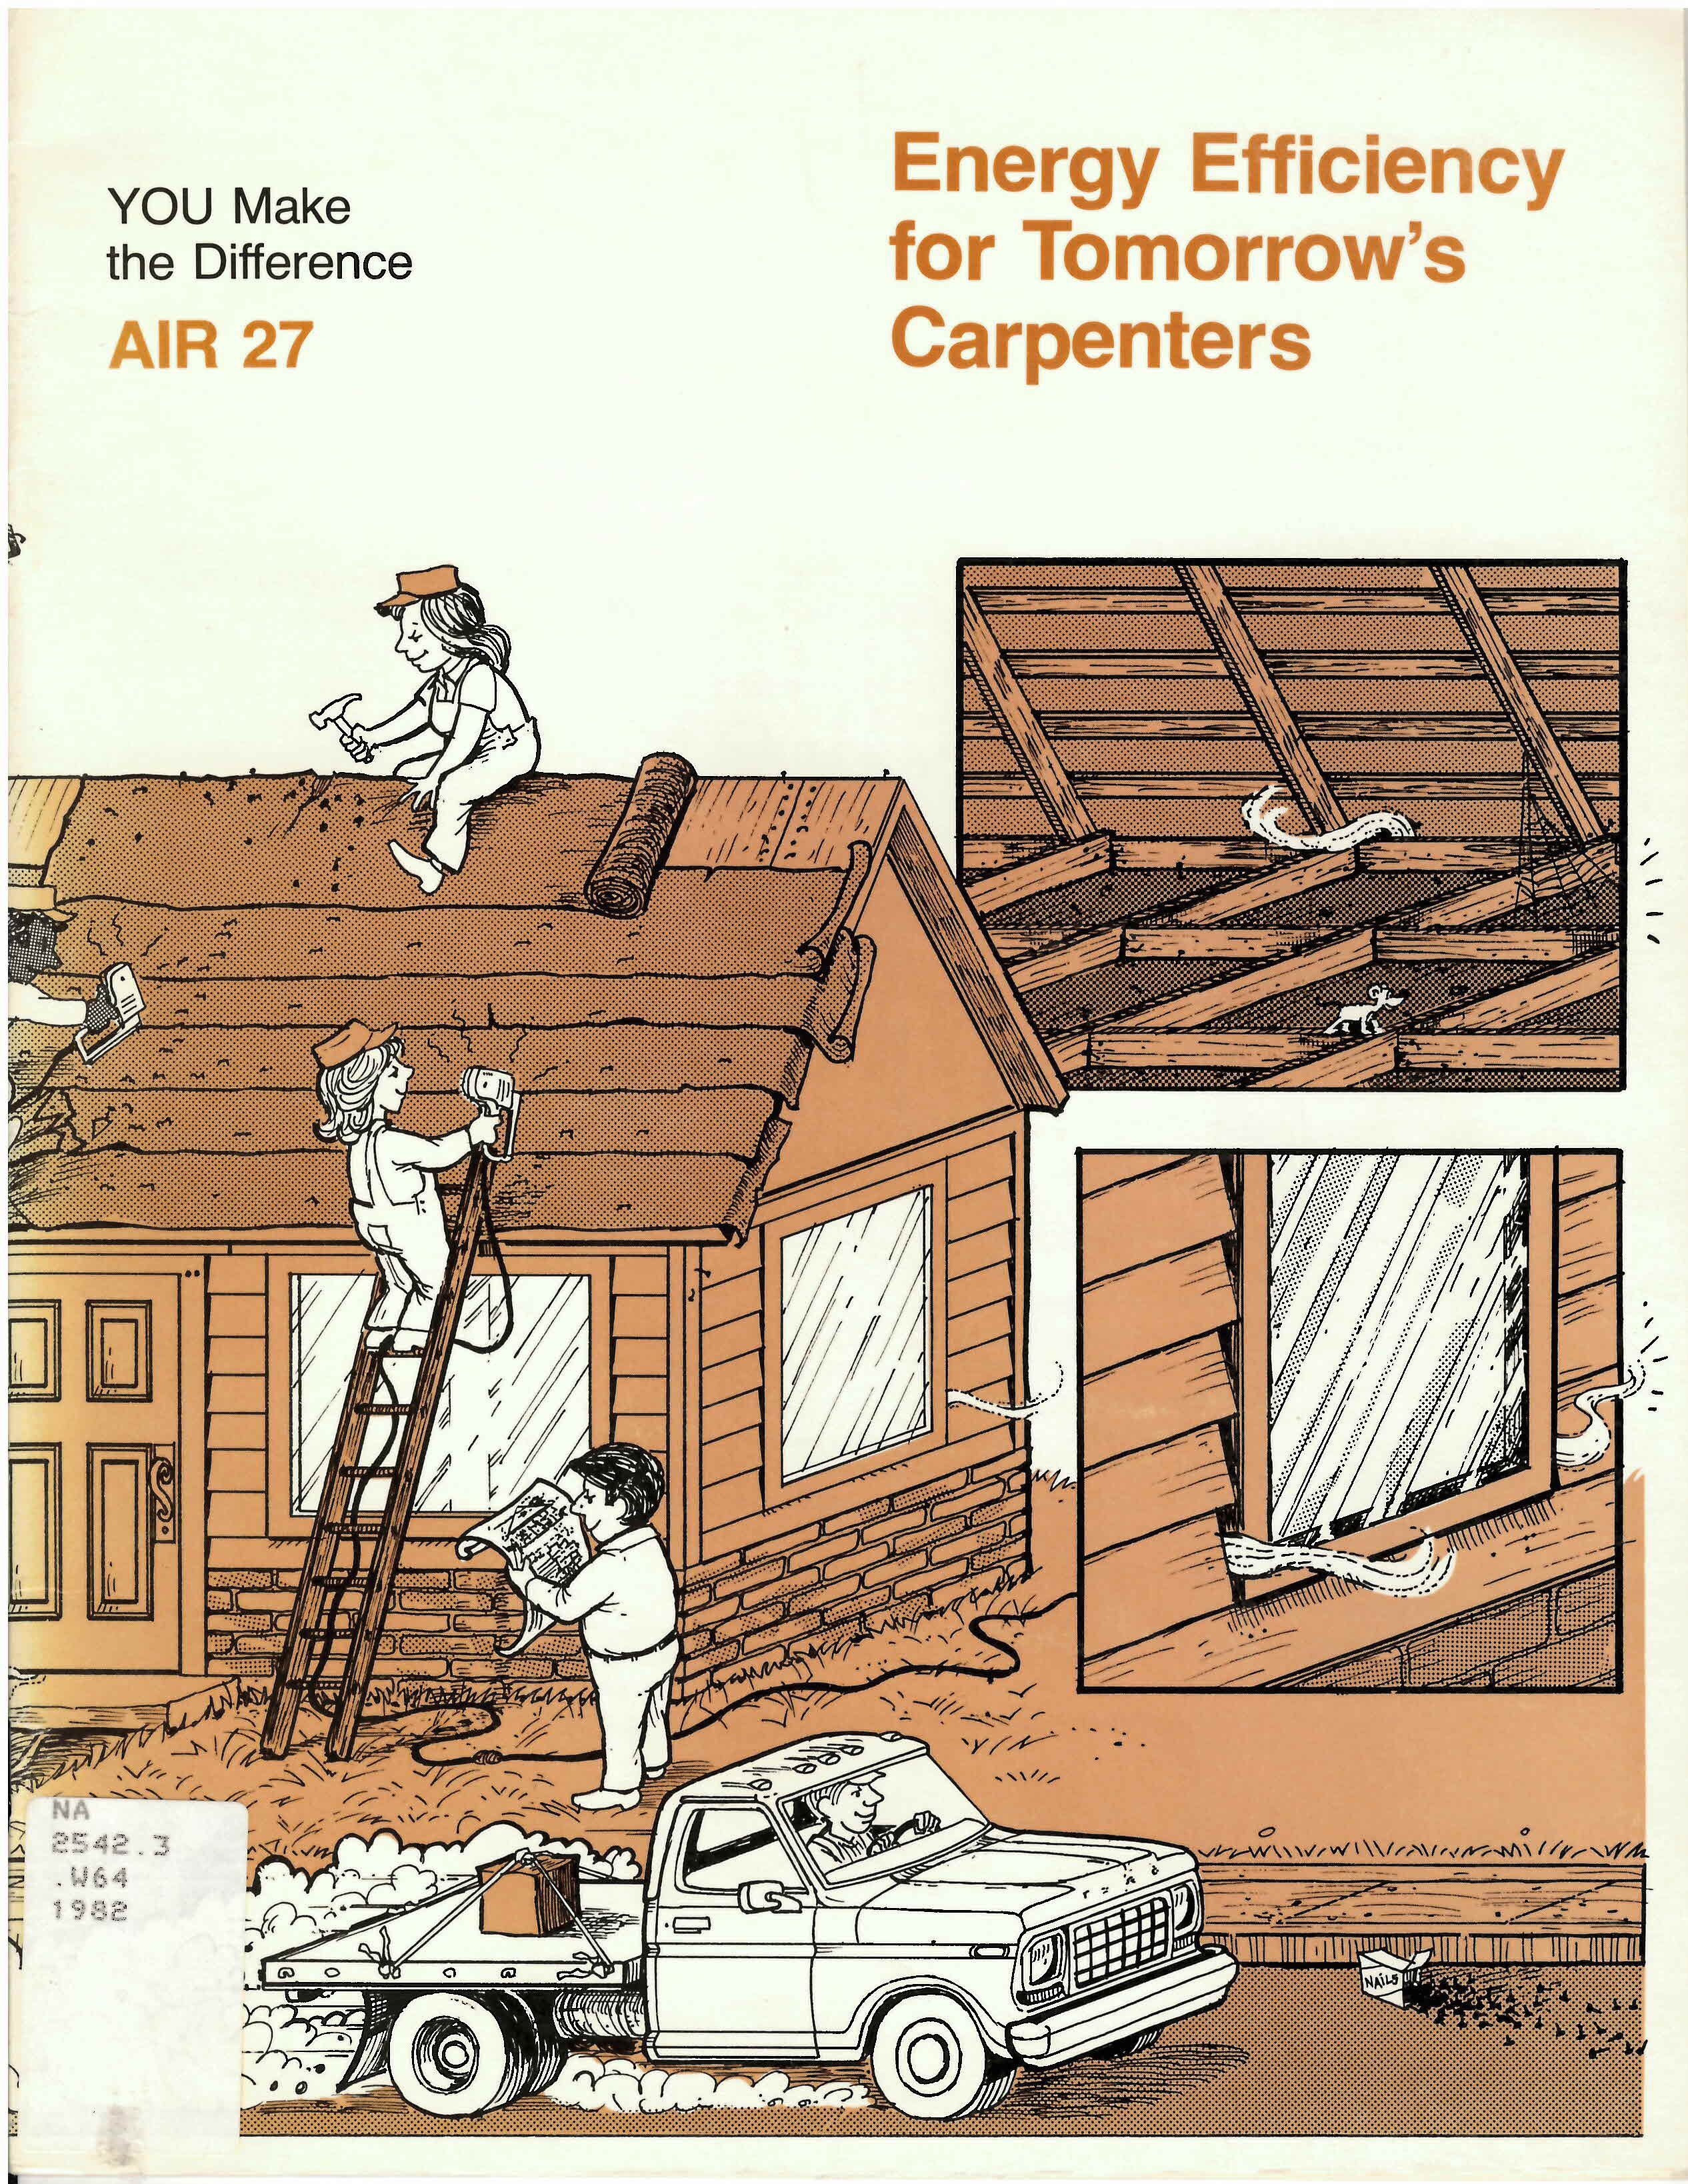 Energy efficiency for tomorrow's carpenters